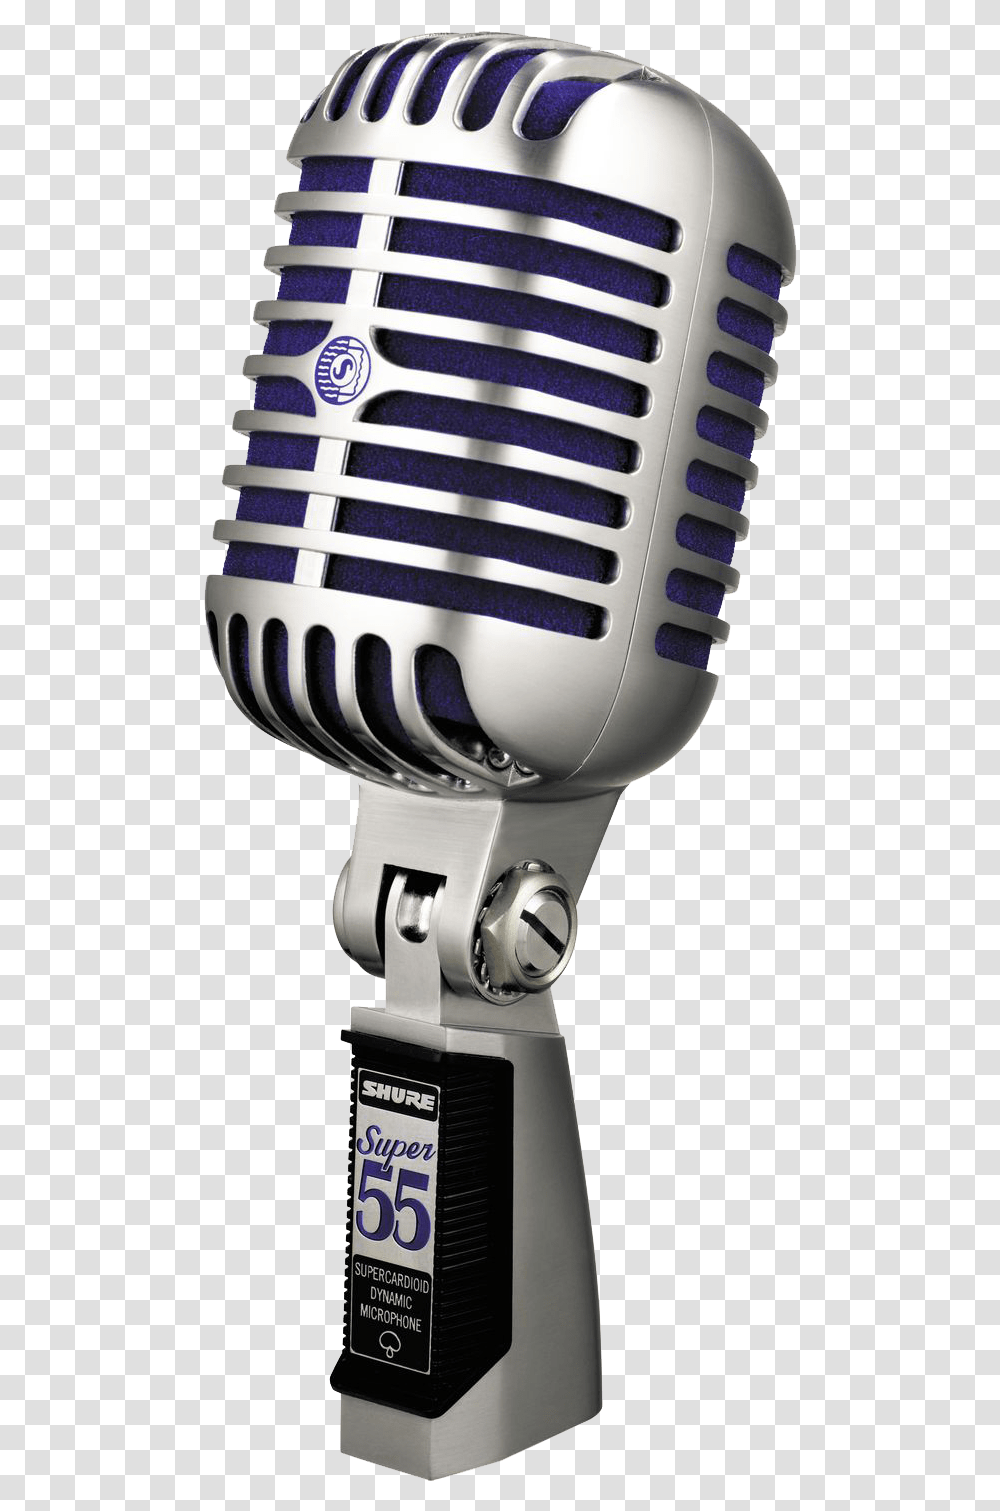 Download Mic Free Hq Image Freepngimg Micro Shure Super, Helmet, Clothing, Apparel, Electrical Device Transparent Png